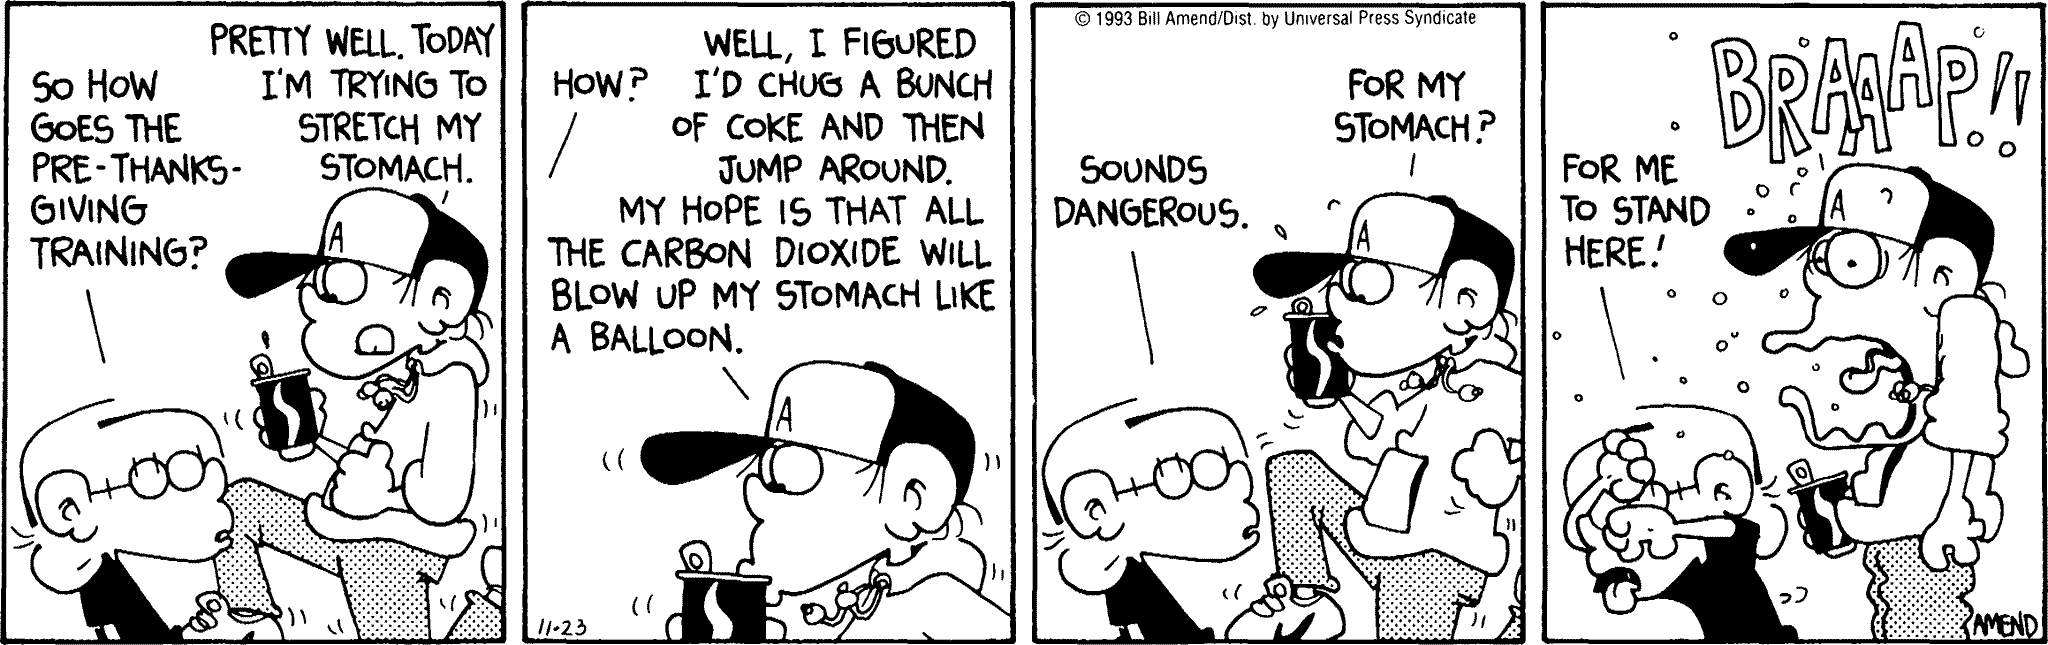 Thanksgiving Comics - FoxTrot comic strip by Bill Amend - Published November 23, 1993 - Transcript: Jason Fox: So how goes the pre-Thanksgiving training? Peter Fox: Pretty well. Today I'm trying to stretch my stomach. Jason Fox: How? Peter Fox: Well, I figured I'd chug a bunch of coke and then jump around. My hope is that all the carbon dioxide will blow up my stomach like a balloon. Jason Fox: Sounds dangerous. Peter Fox: For my stomach? Jason Fox: For me to stand here! Peter Fox: BRAAAP!!